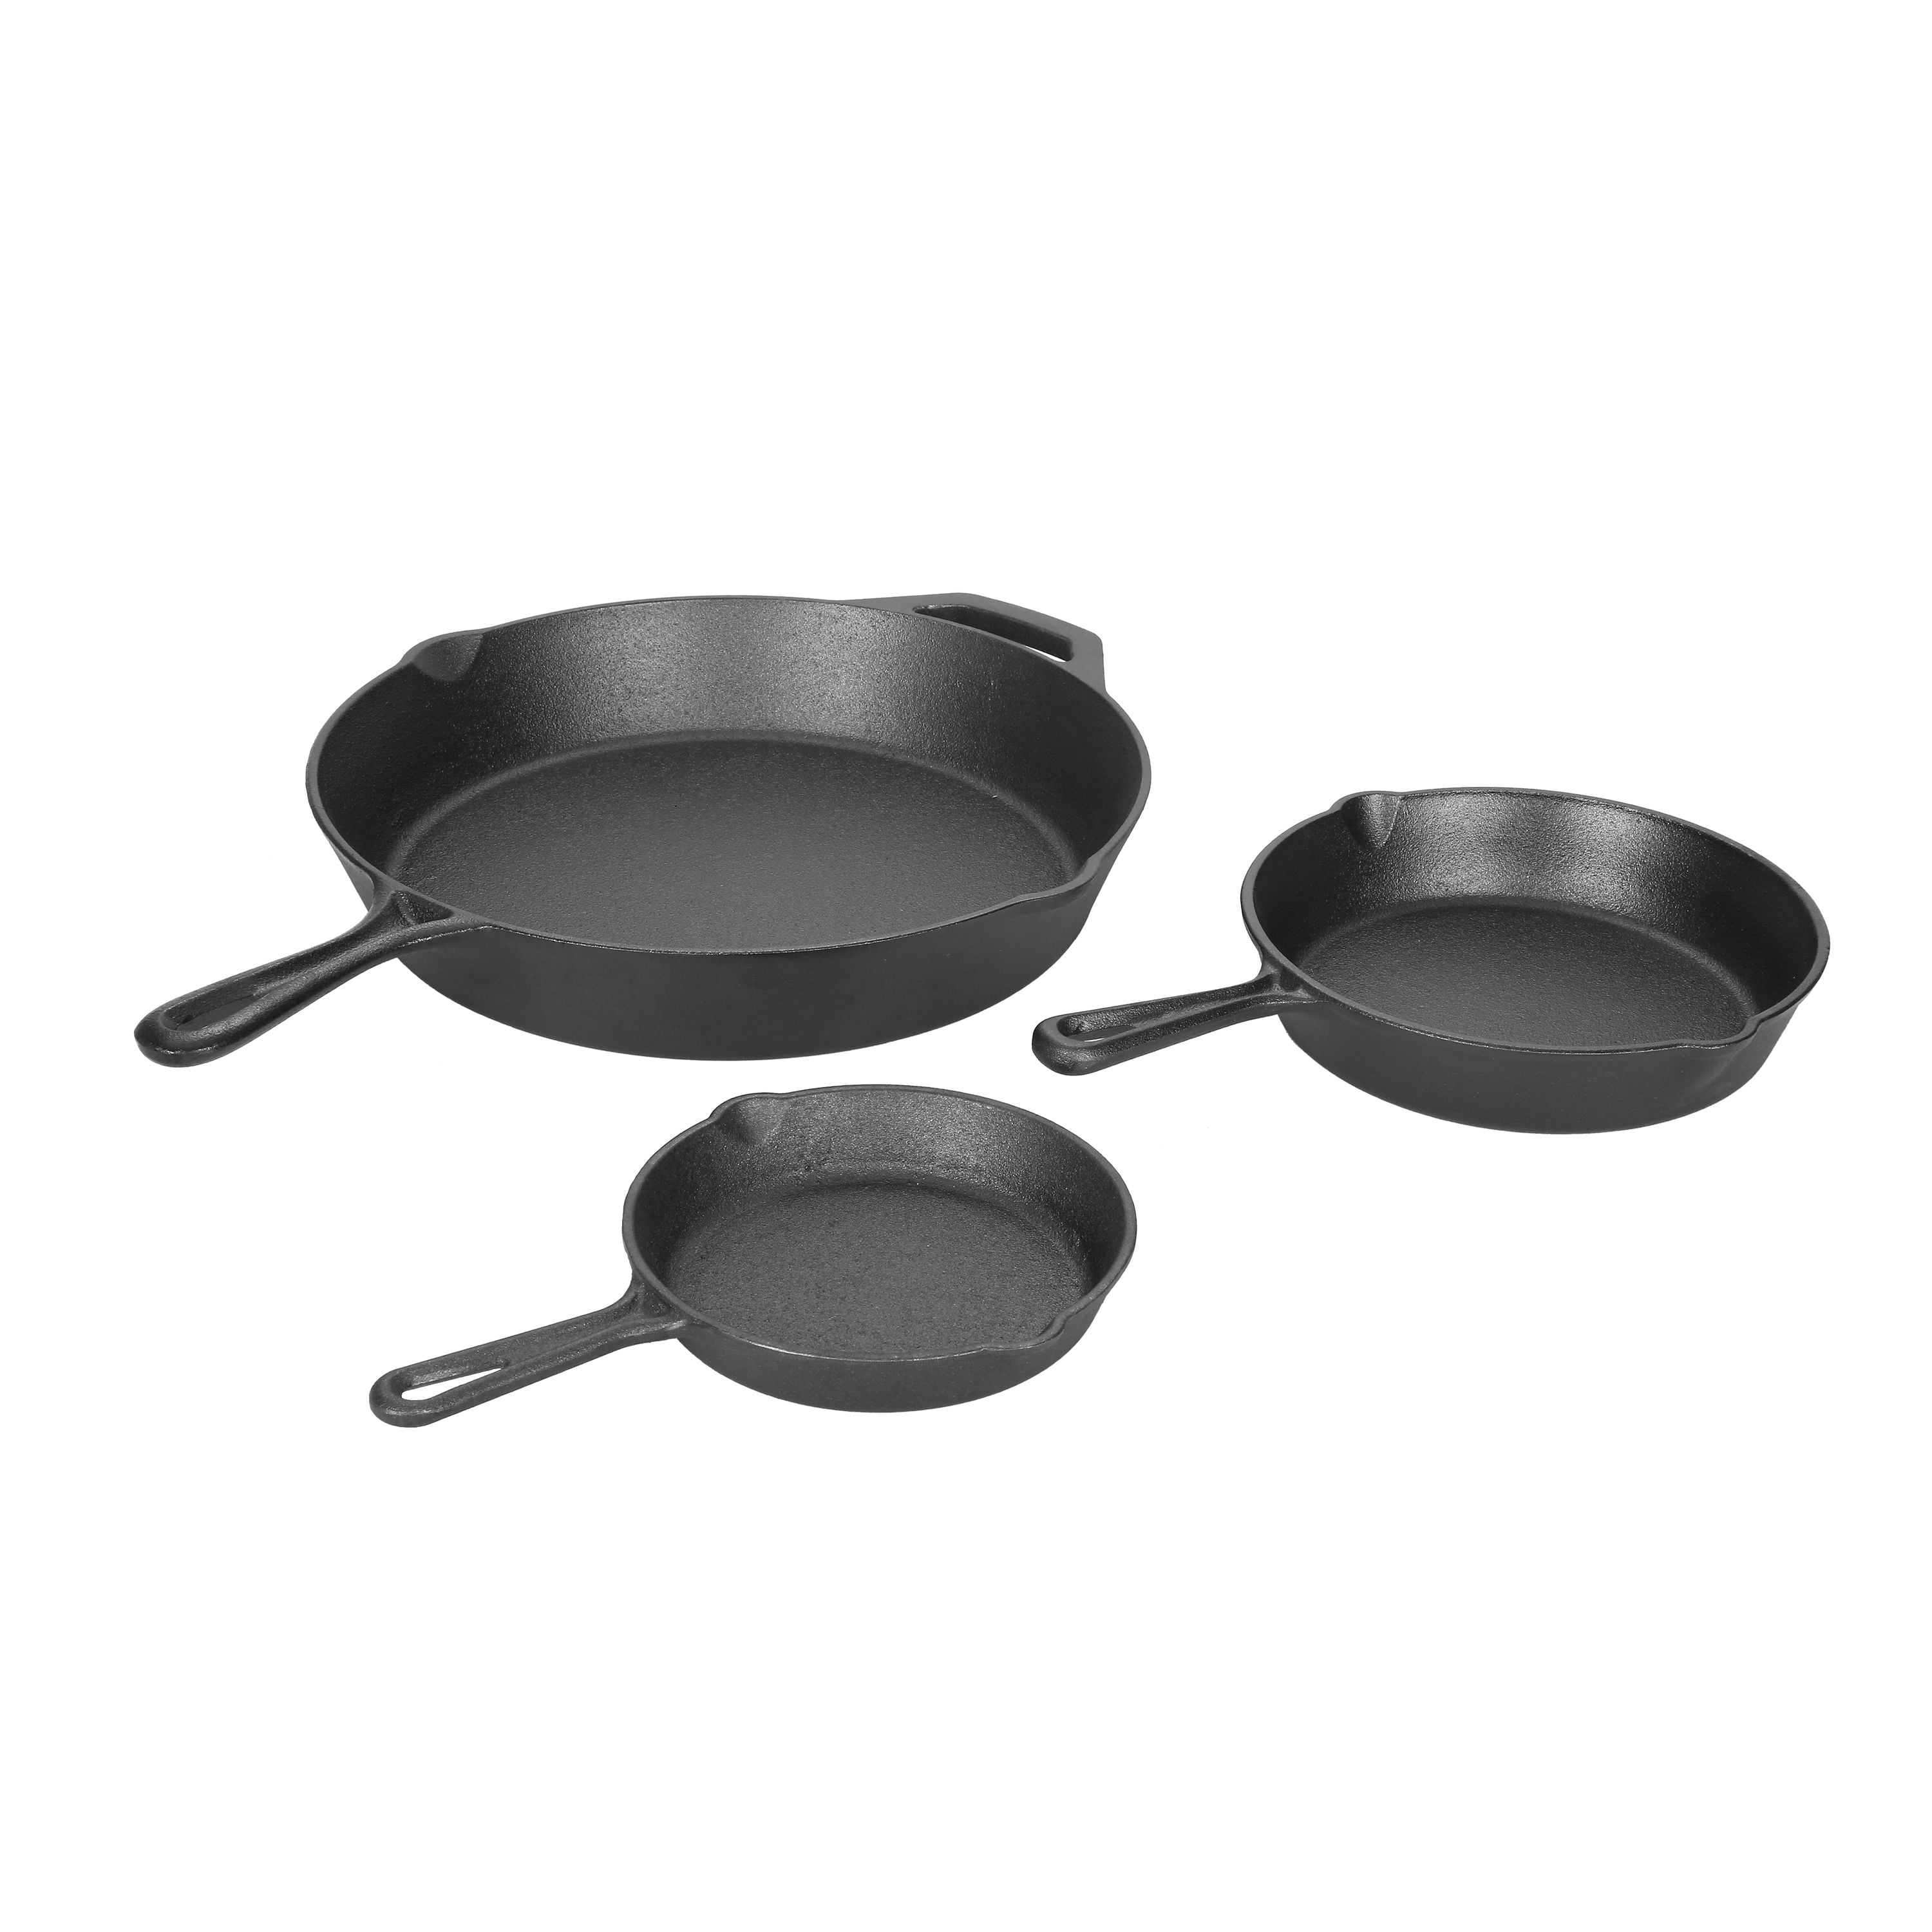 Cast Iron Skillet - 6"-inch Frying Pan with Drip-Spouts - Preseasoned  Oven